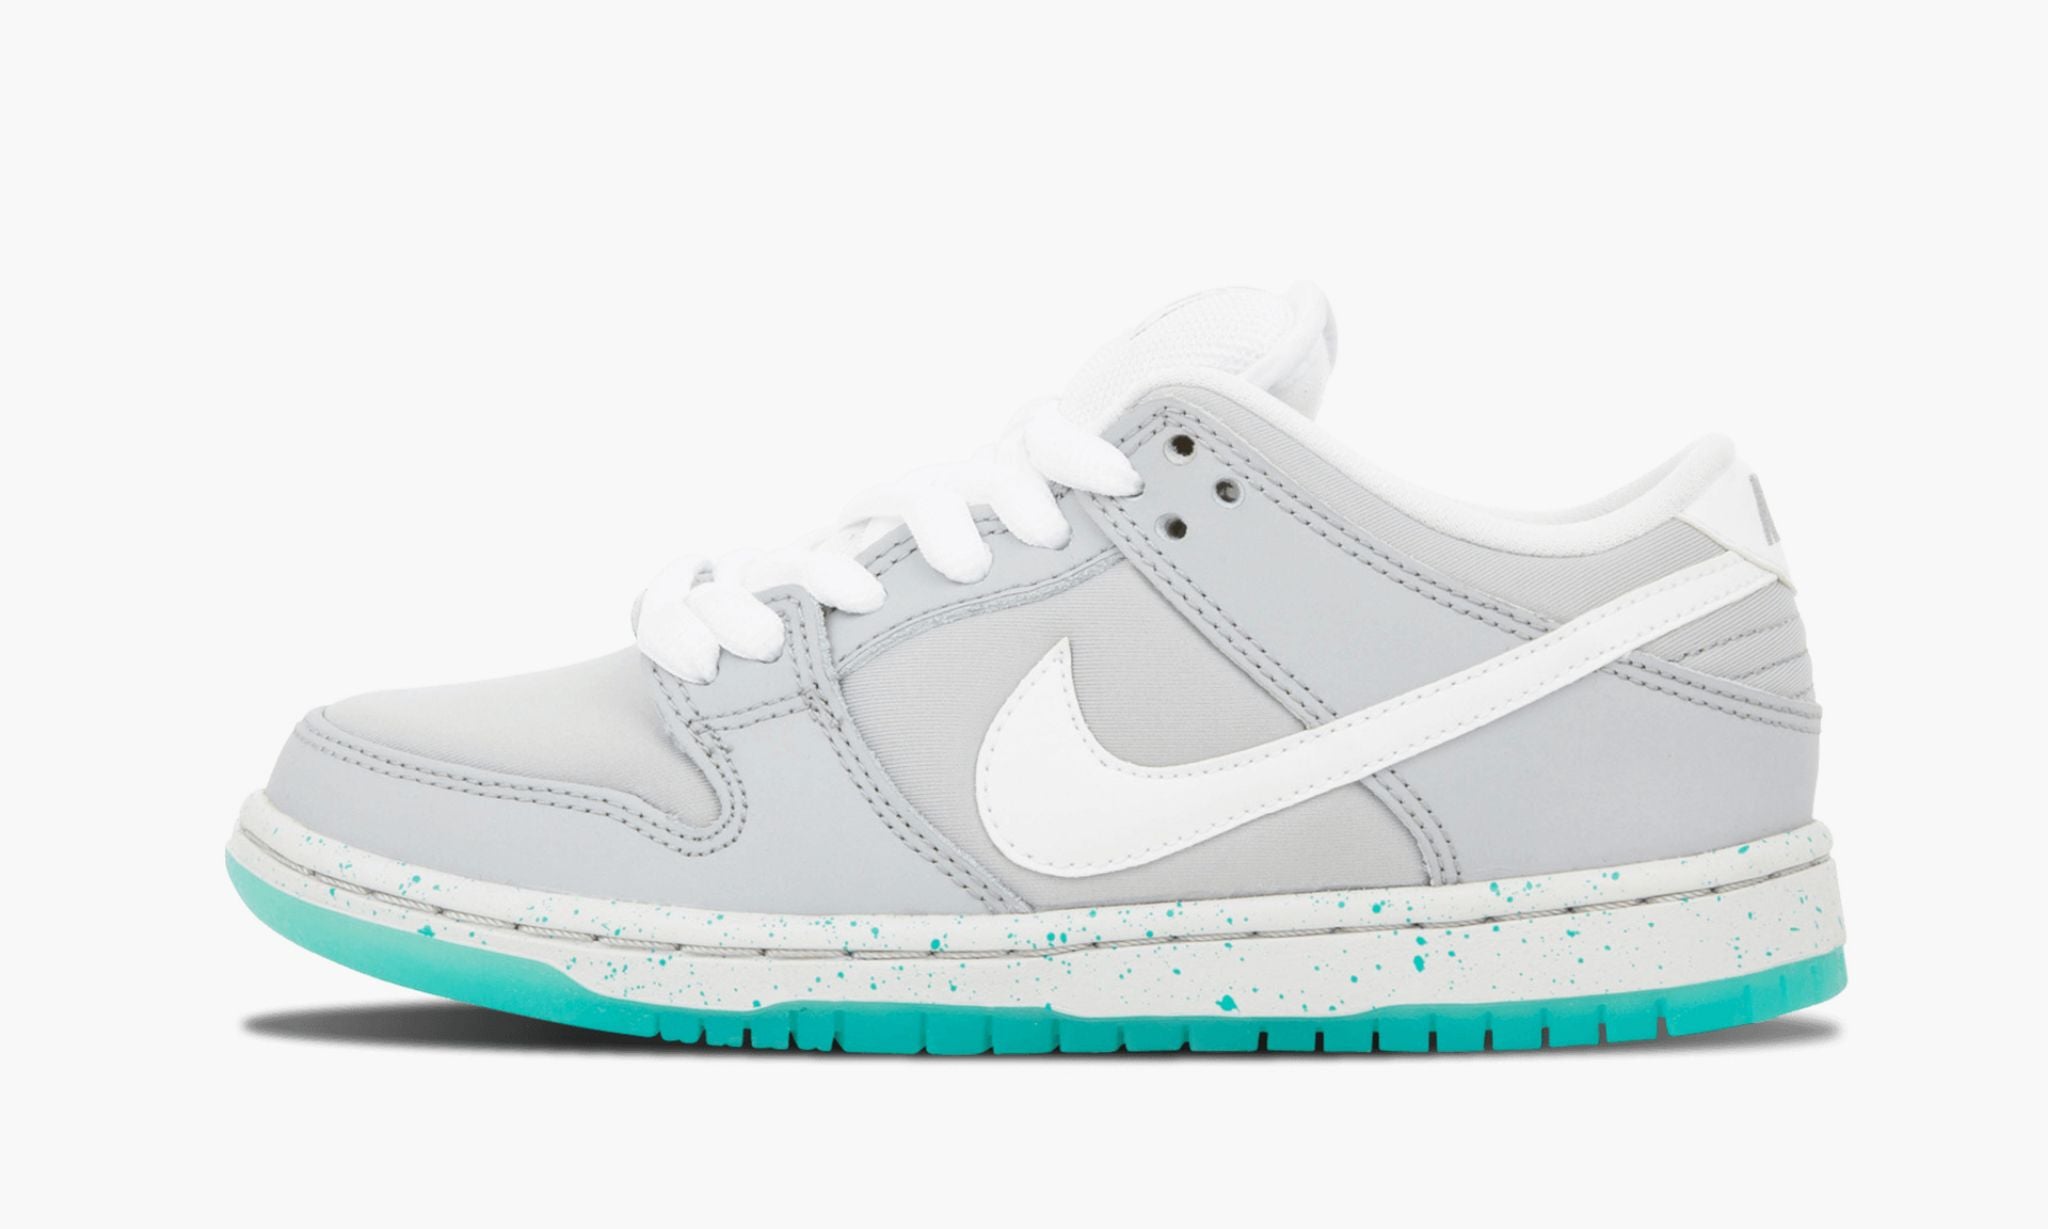 Nike Dunk SB Low Marty McFly